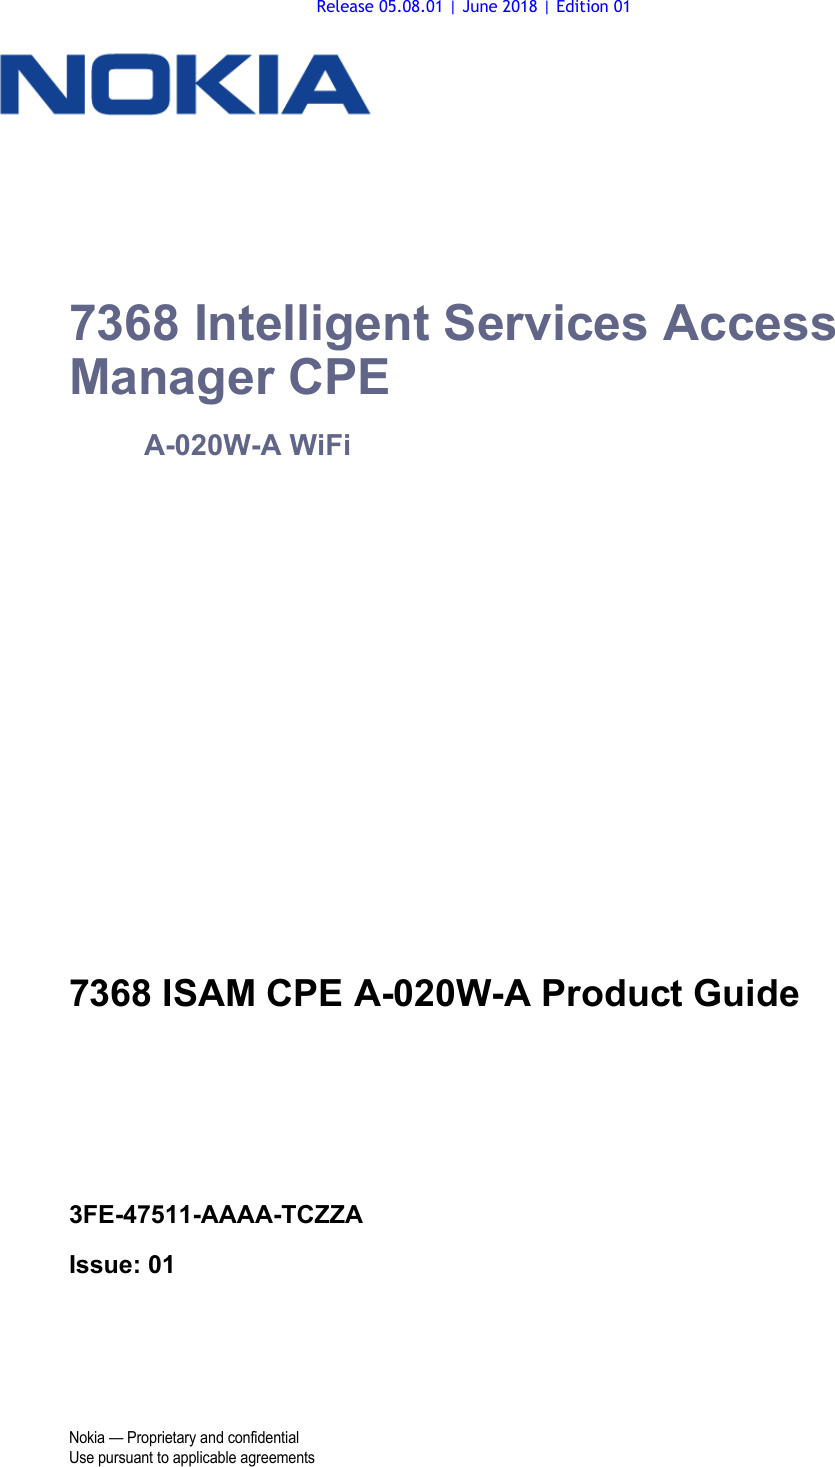 Nokia — Proprietary and confidentialUse pursuant to applicable agreements 7368 Intelligent Services Access Manager CPEA-020W-A WiFi7368 ISAM CPE A-020W-A Product Guide3FE-47511-AAAA-TCZZAIssue: 01 7368 ISAM CPE A-020W-A Product GuideRelease 05.08.01 | June 2018 | Edition 01